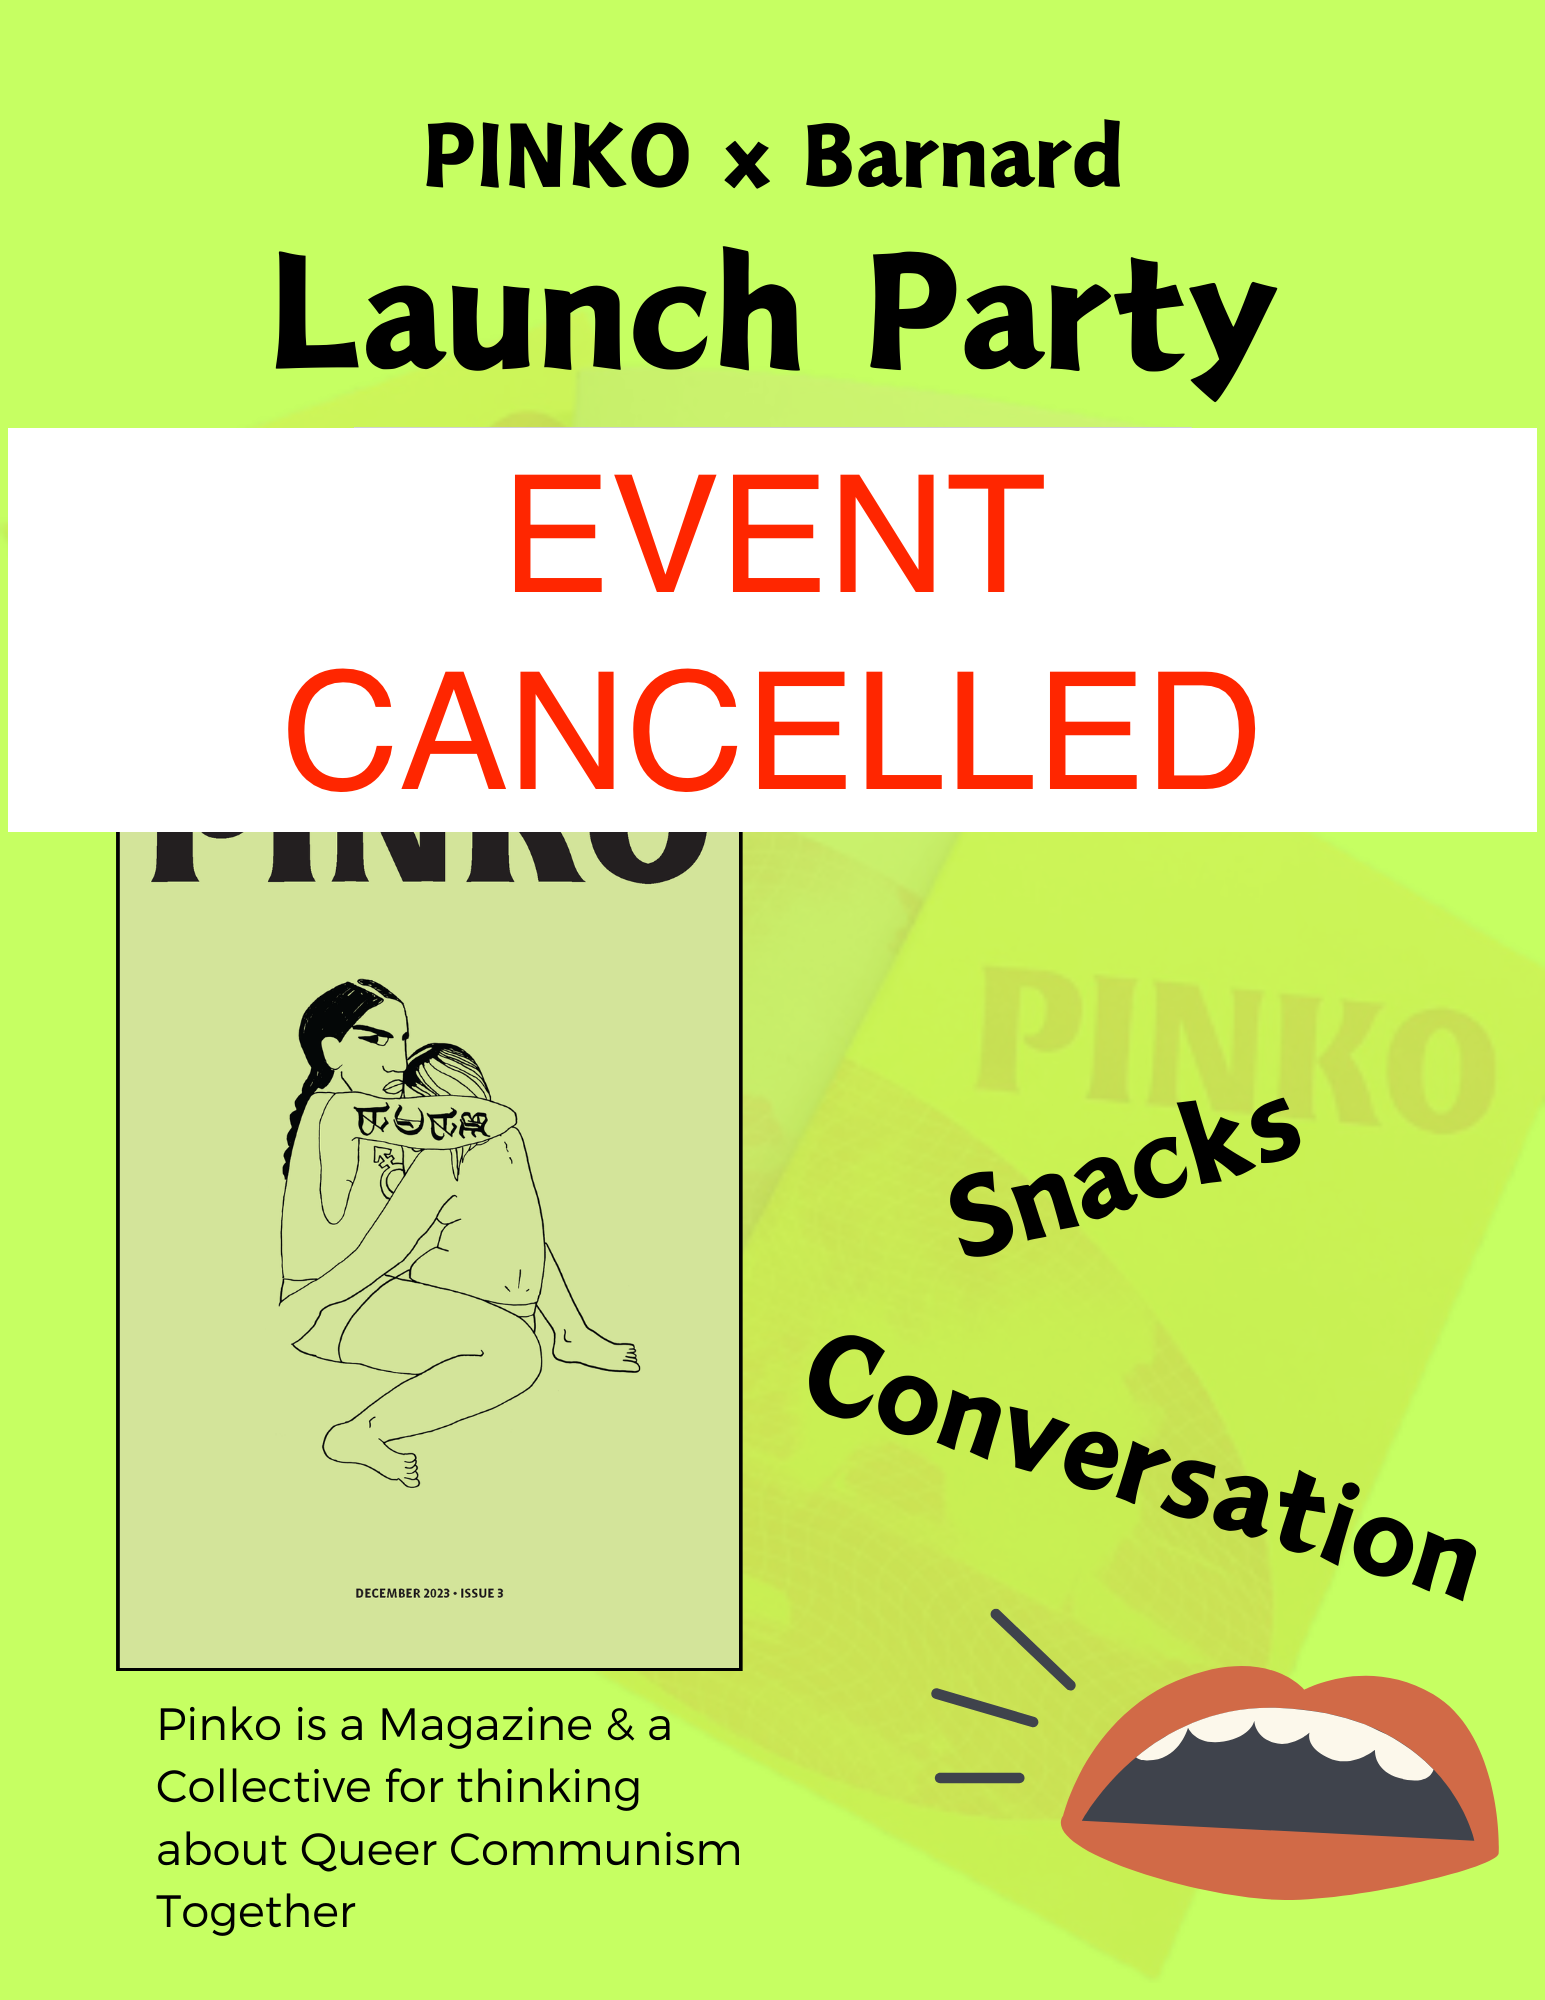 Flyer for Pinko event, overlaid with the words "event cancelled"